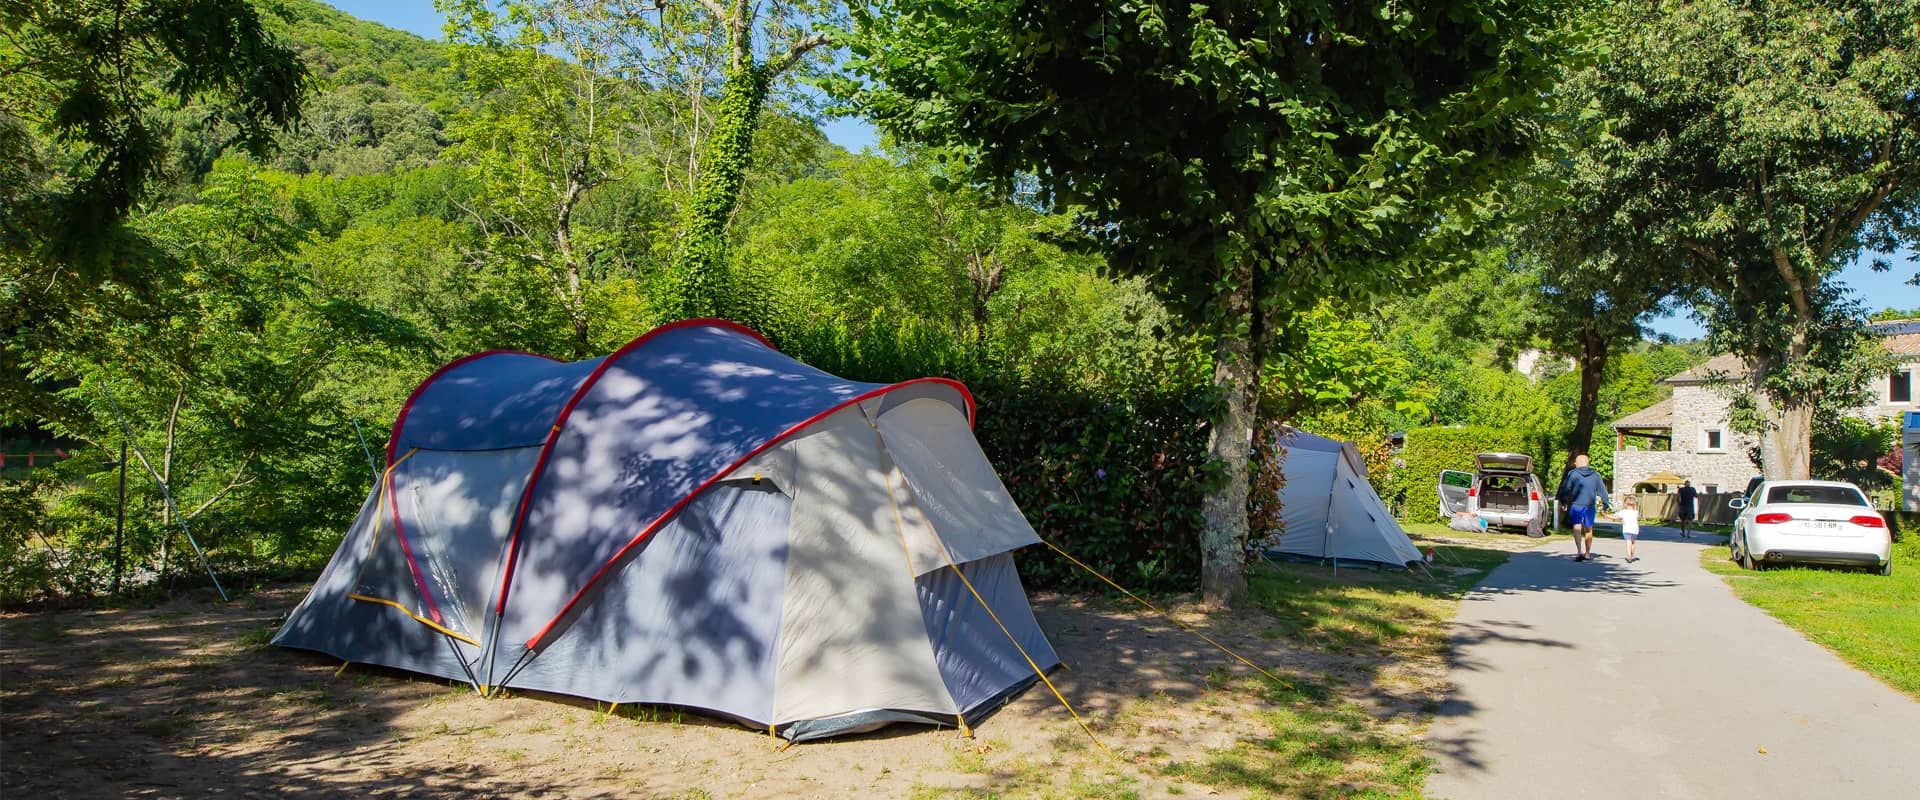 emplacement-camping-ardeche-01